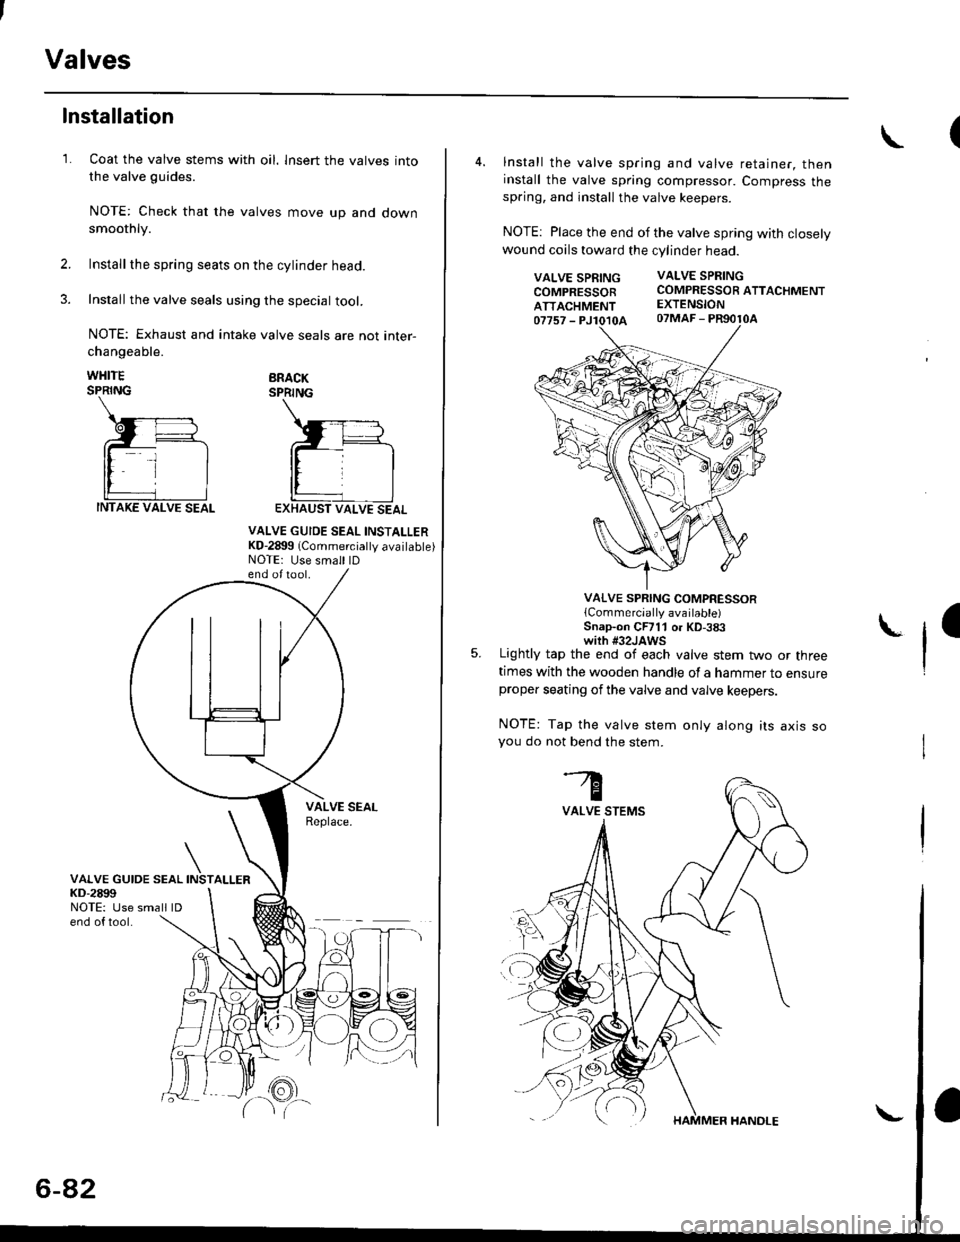 HONDA CIVIC 1999 6.G User Guide Valves
1.
Installation
Coat the valve stems with oil. lnsert the valves into
the valve guides.
NOTE: Check that the valves move up and downsmoothly.
Installthe spring seats on the cylinder head.
Insta